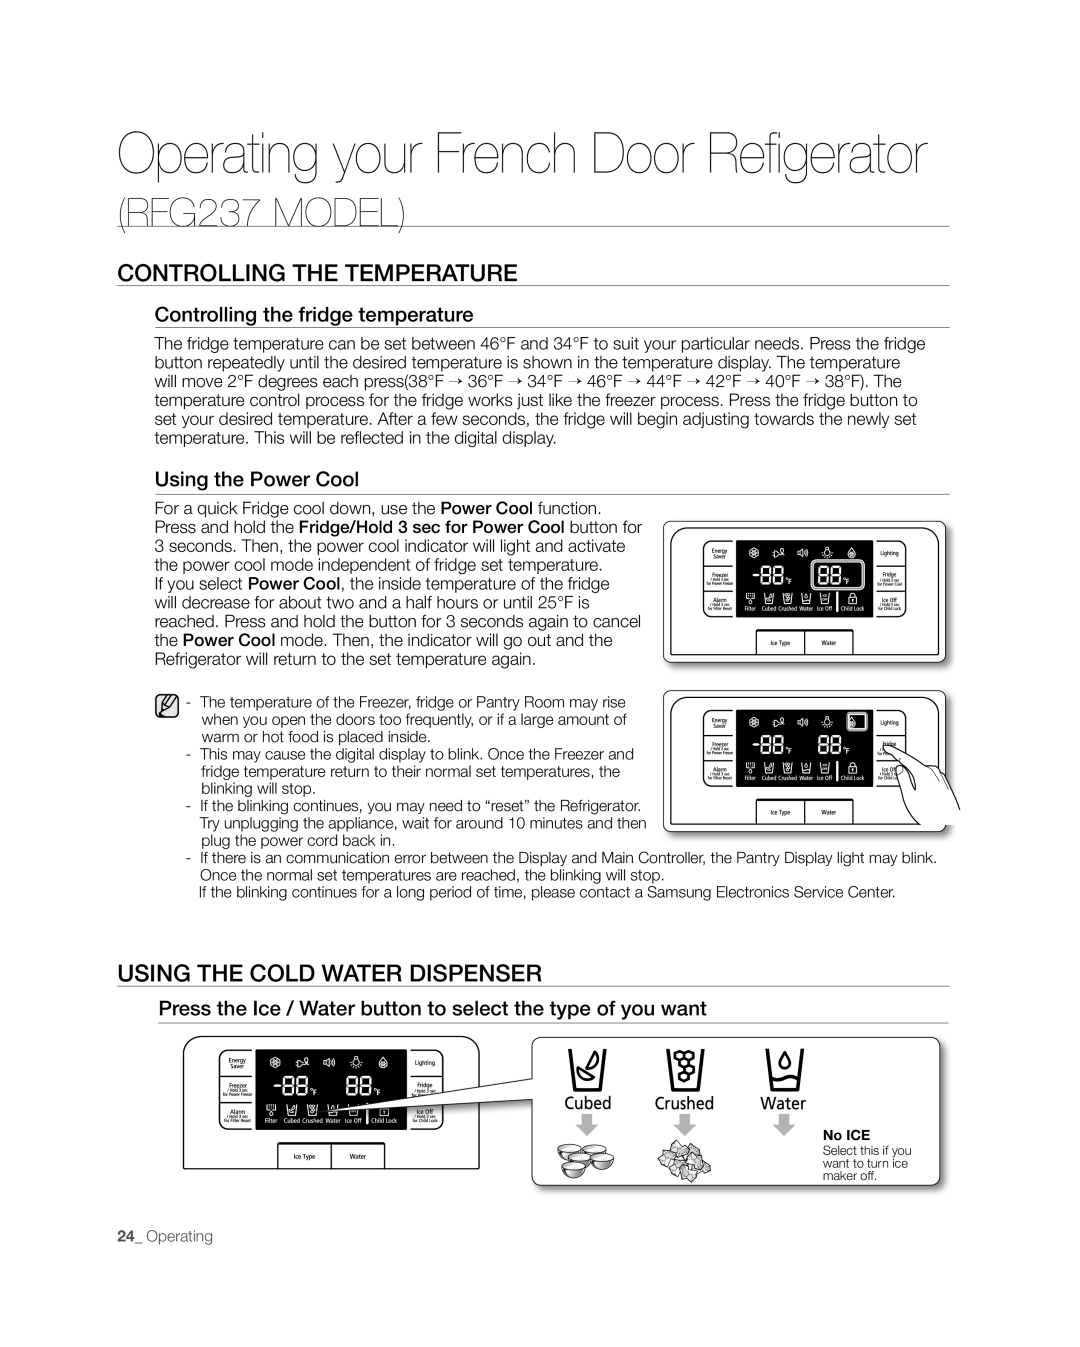 Samsung RFG238AARS user manual Operating your French Door Refigerator, Using The Cold Water Dispenser, RFG237 MODEL 